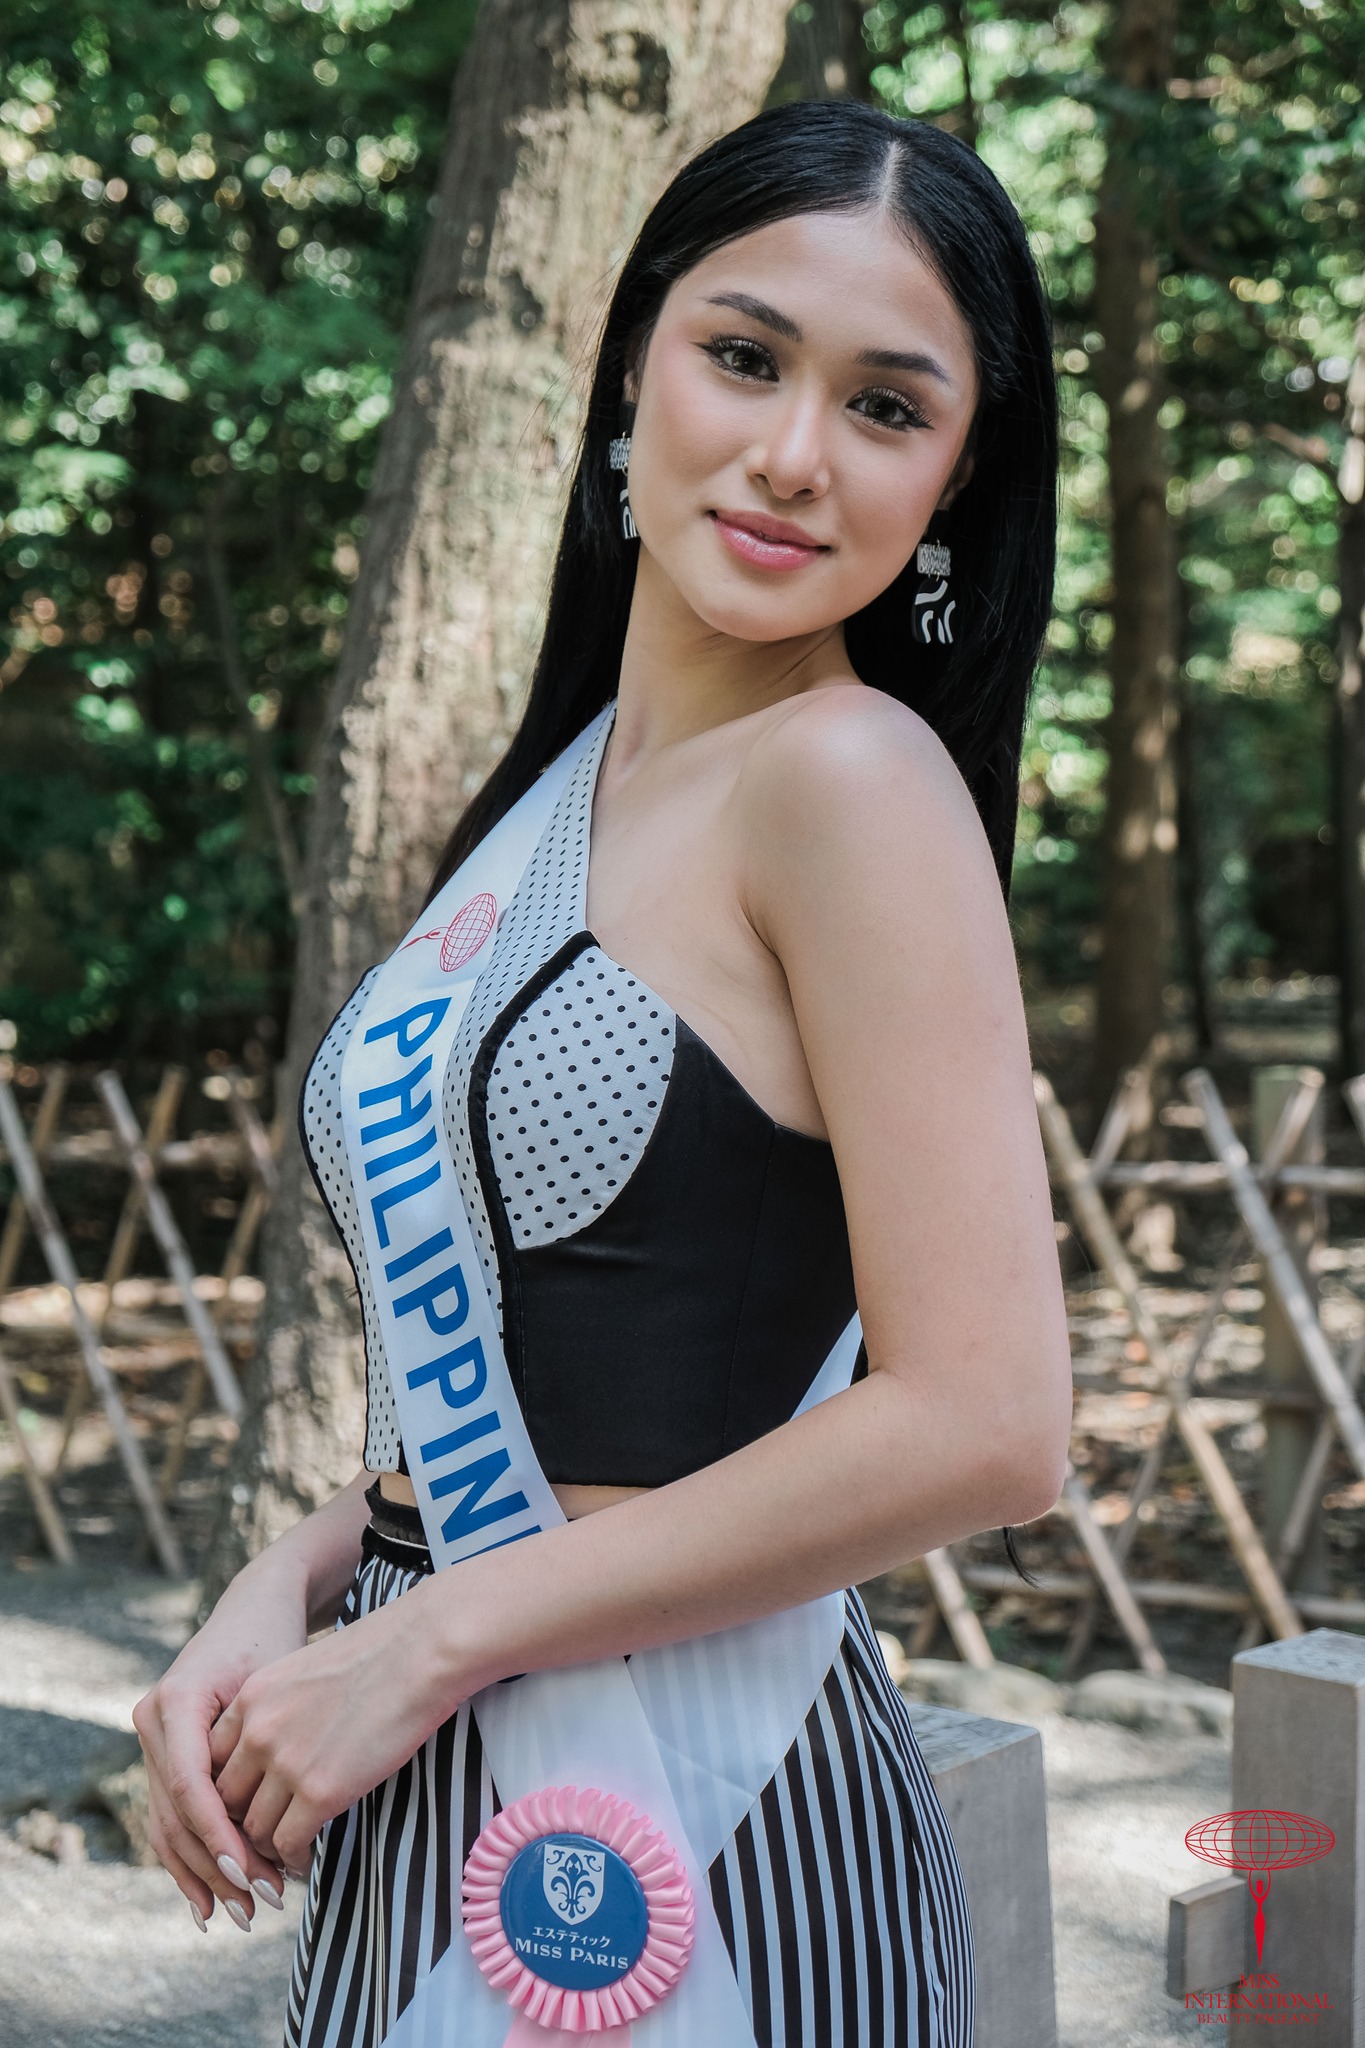 ♔♔♔♔♔ ROAD TO MISS INTERNATIONAL 2023 ♔♔♔♔♔ - Page 5 39322710